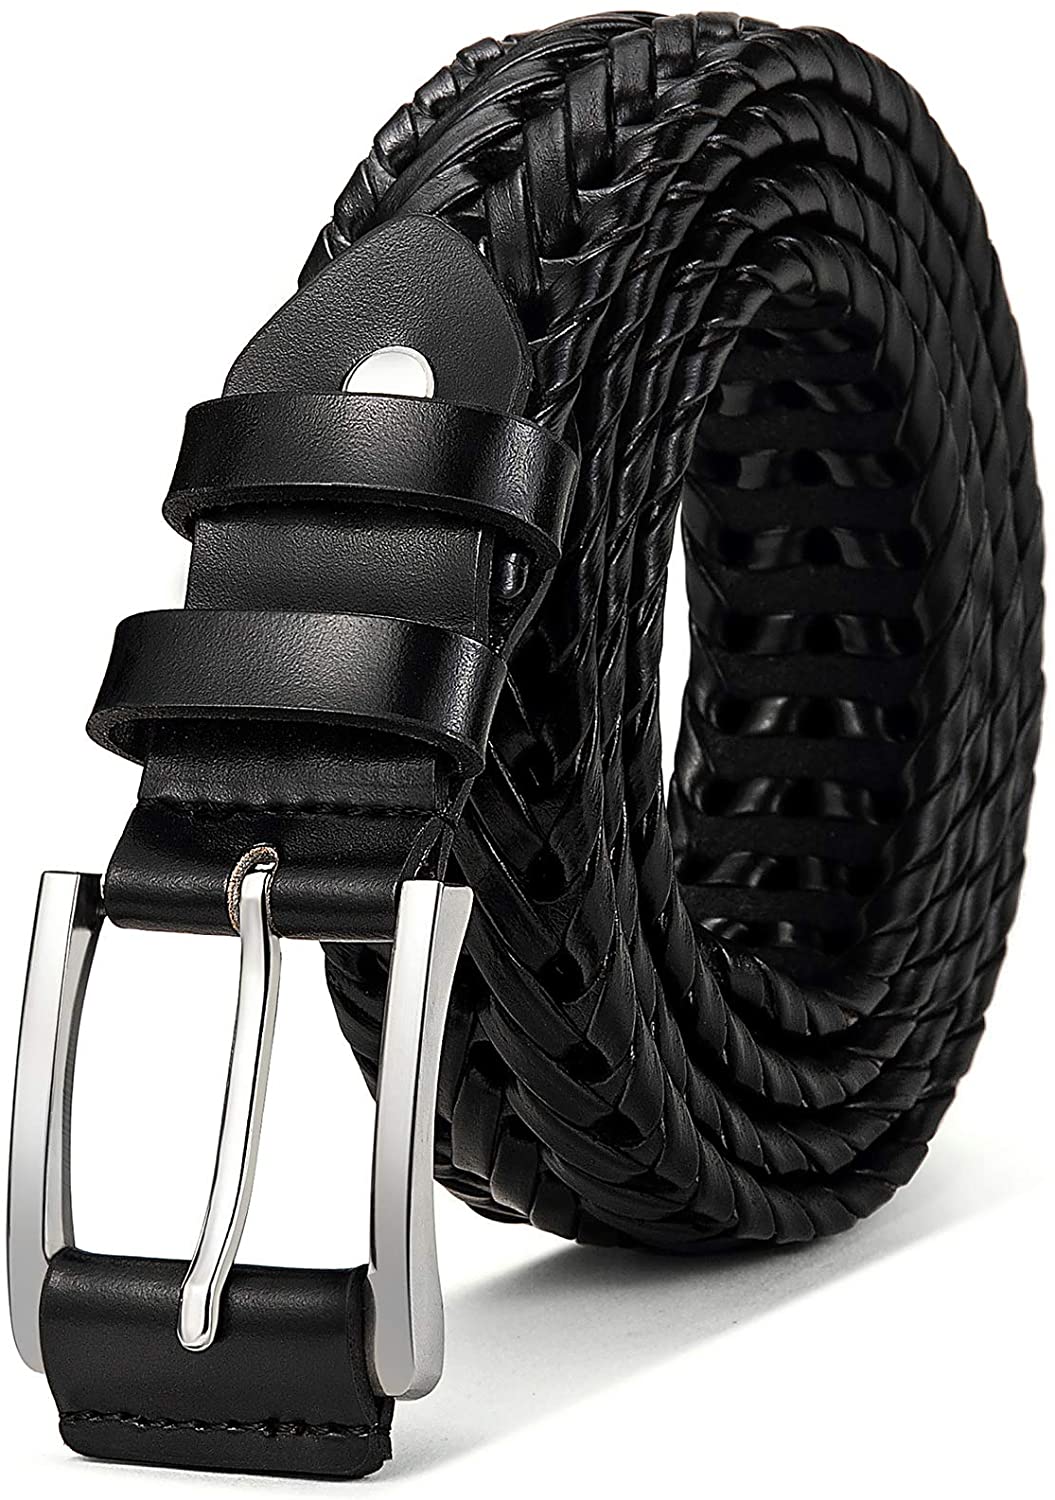 Mens Belts,Bulliant Leather Woven Braided Belts for Mens Casual Jeans ...